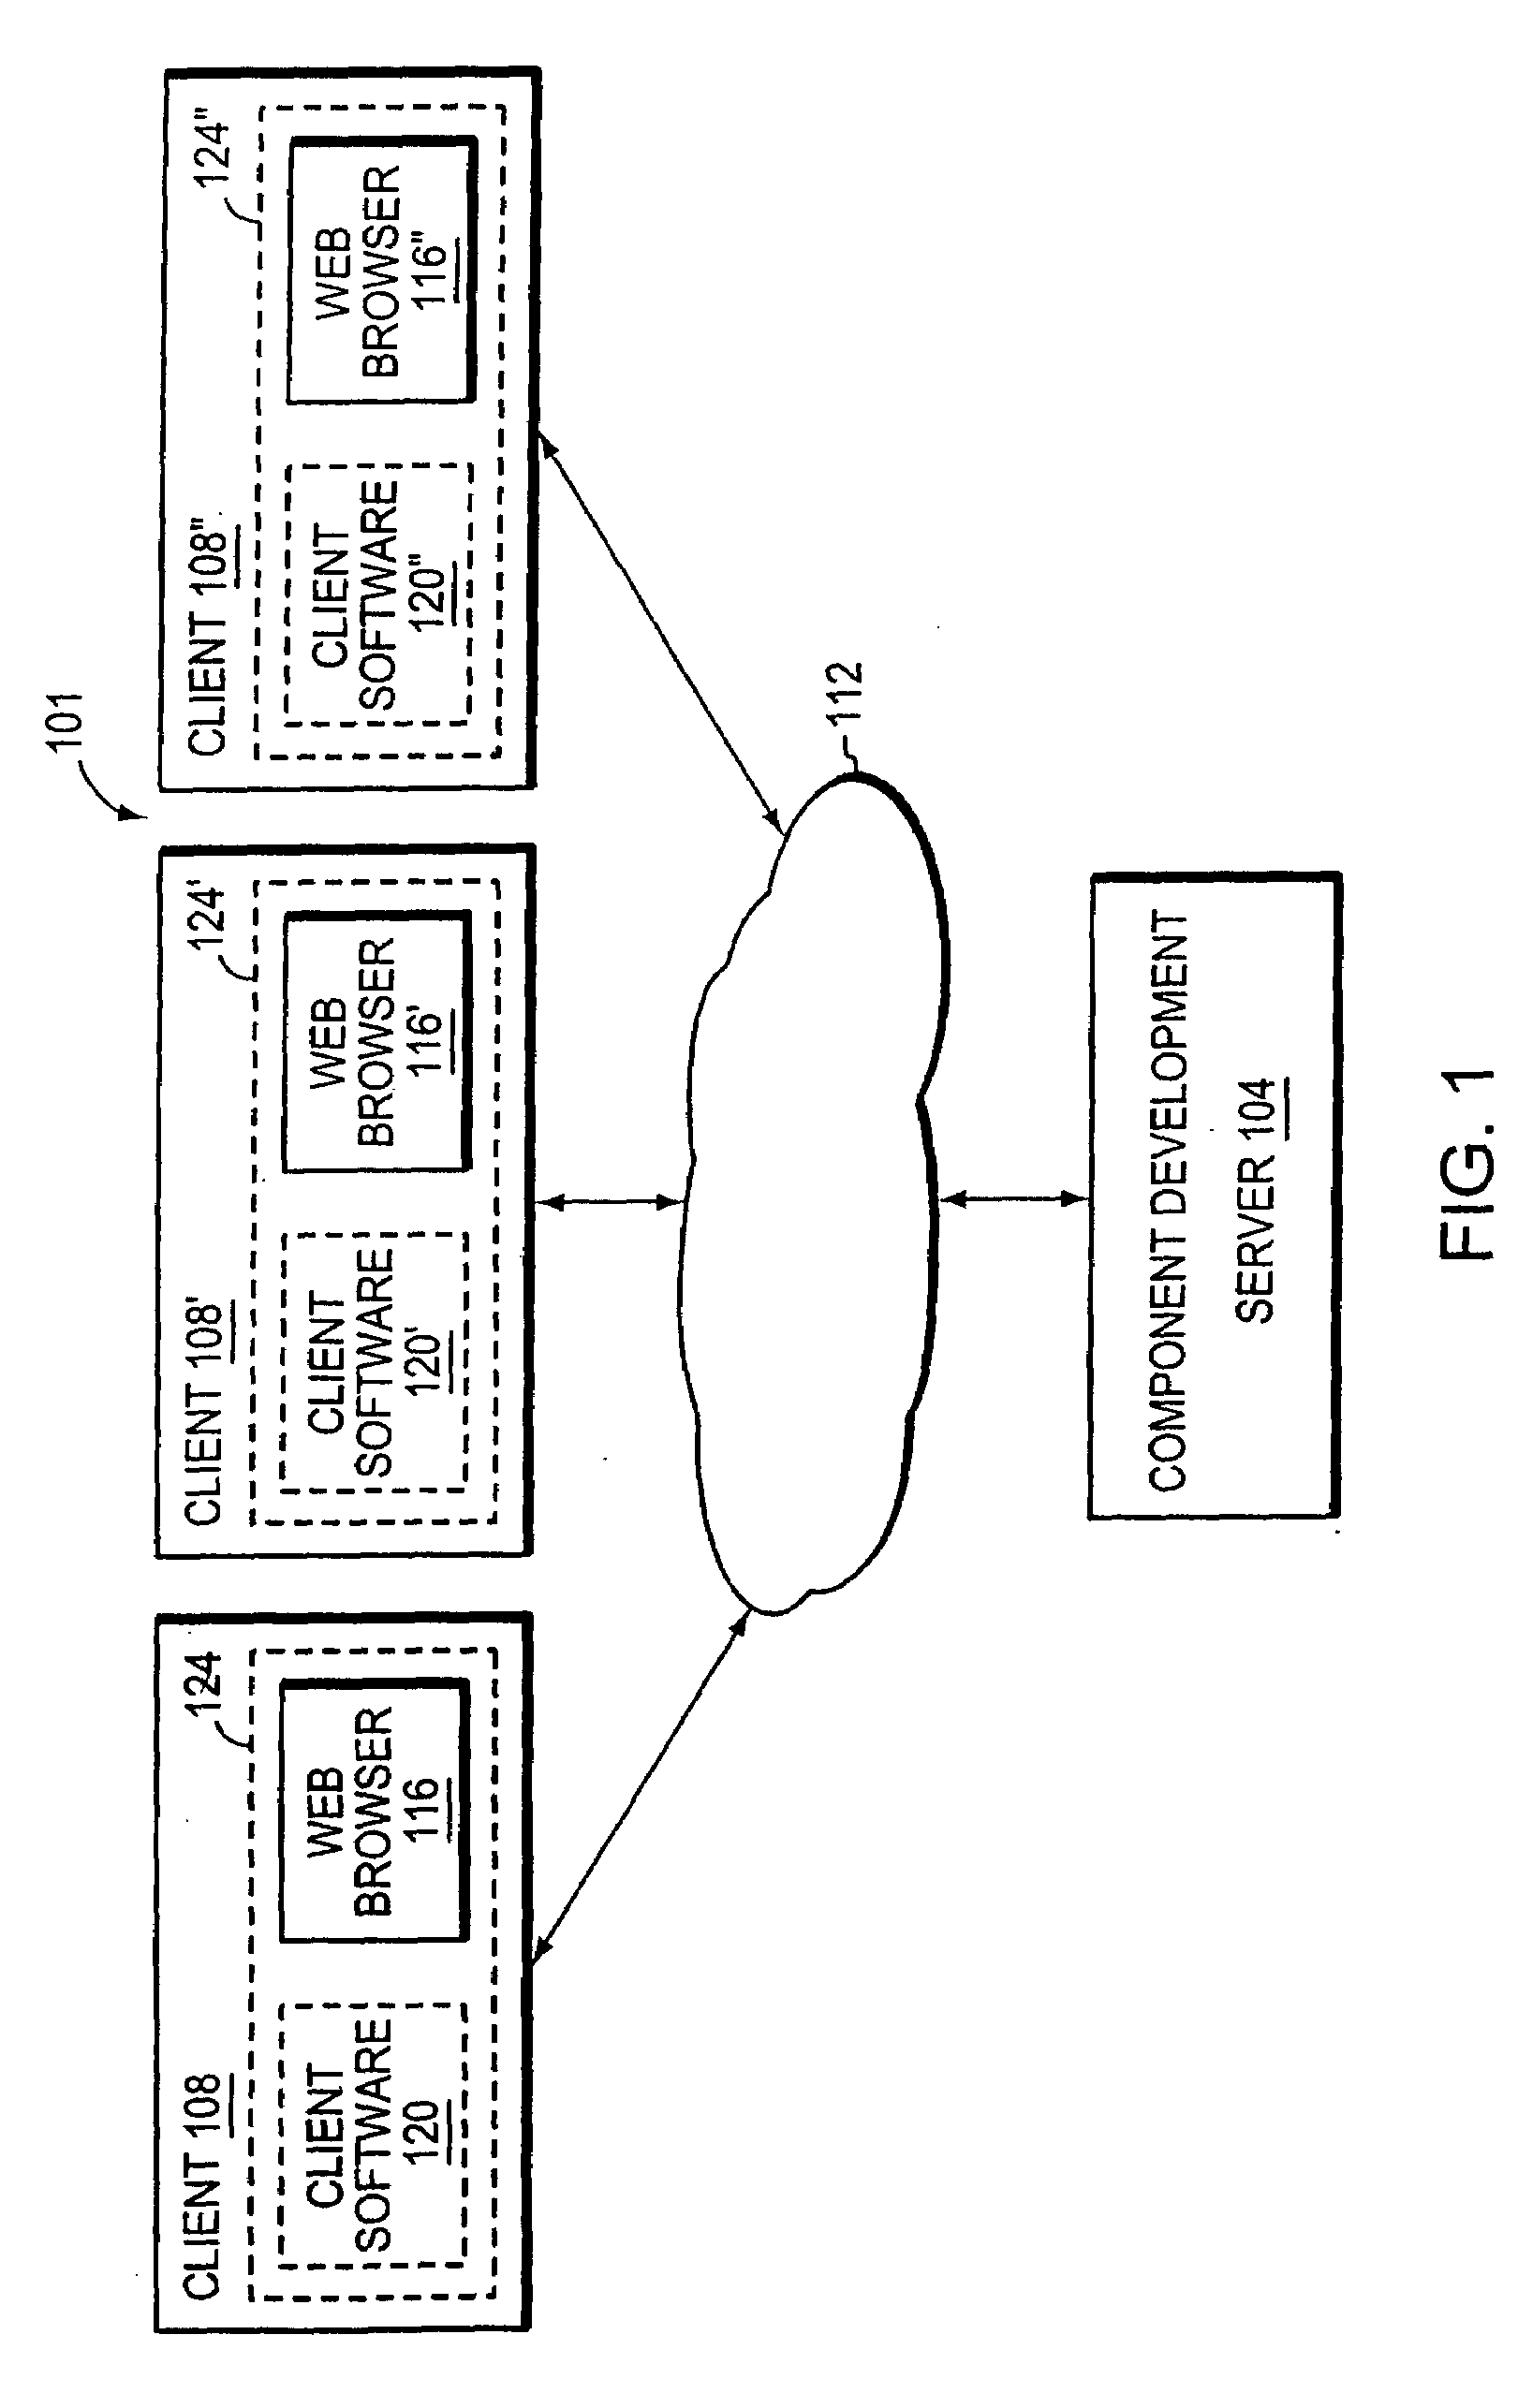 System and method for software development